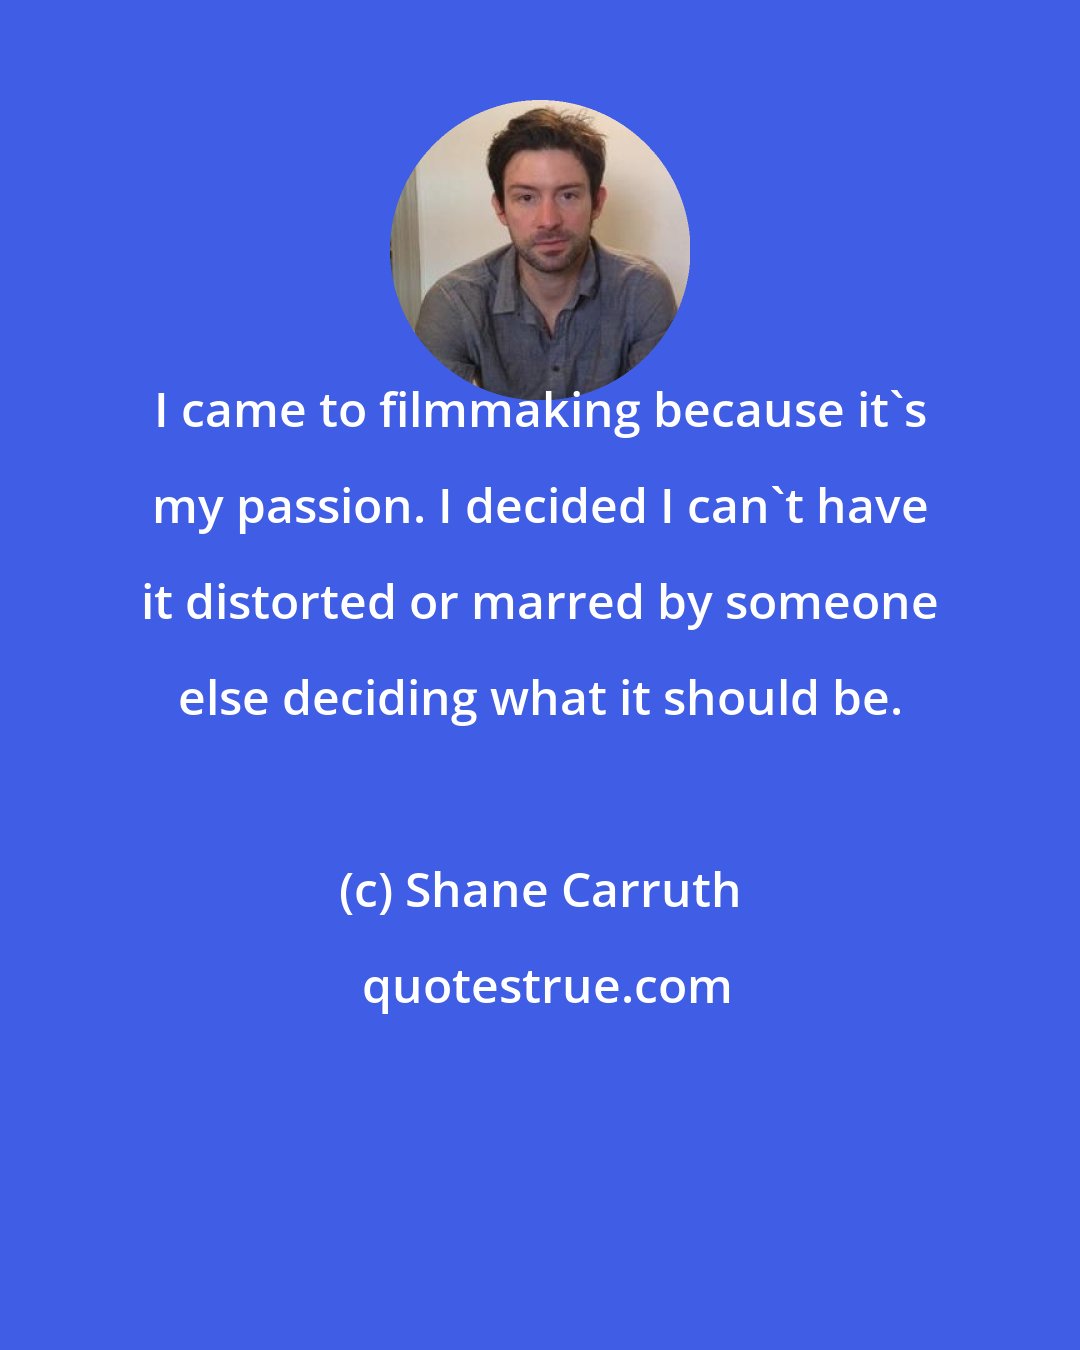 Shane Carruth: I came to filmmaking because it's my passion. I decided I can't have it distorted or marred by someone else deciding what it should be.